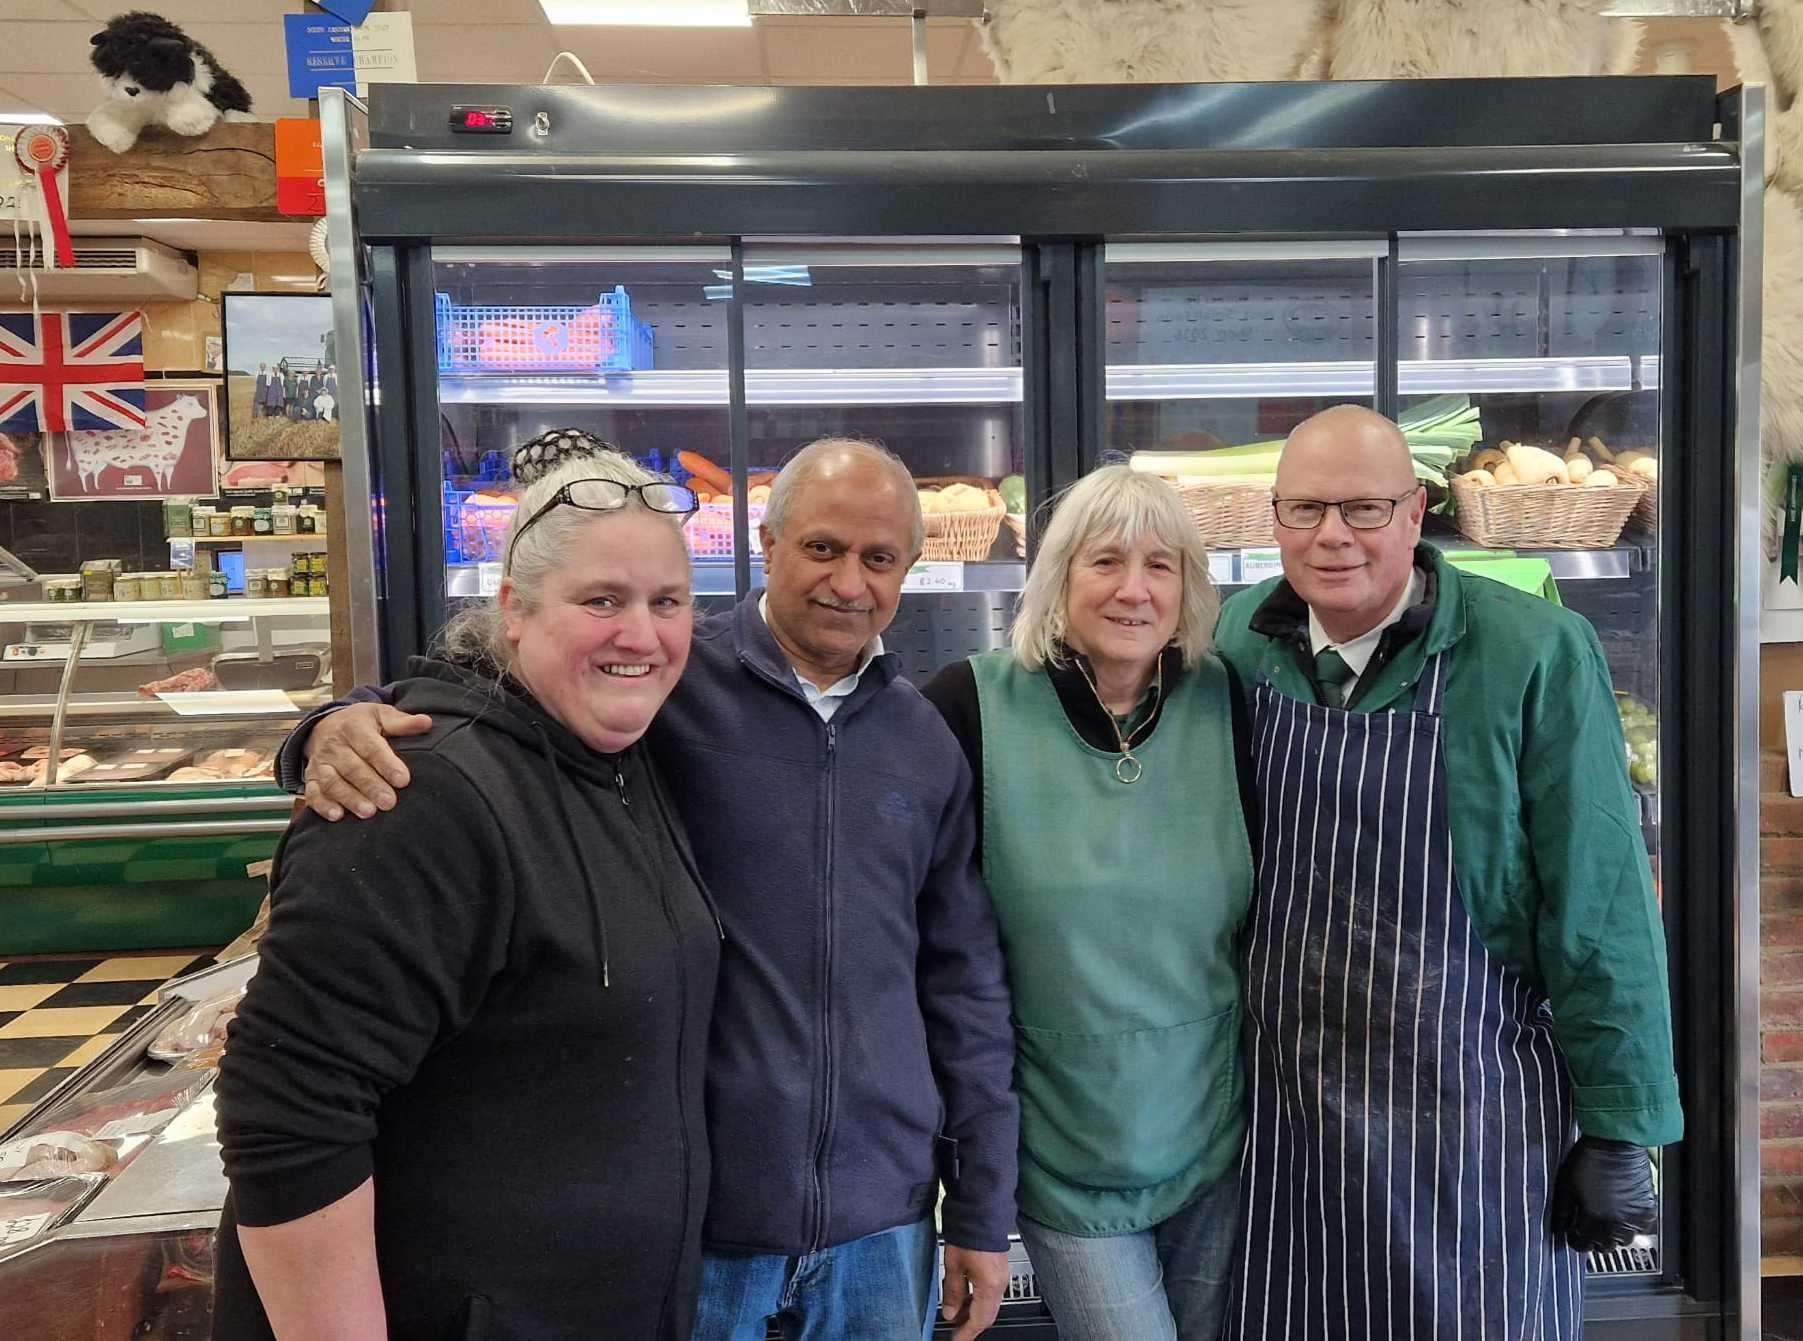 Staff of MB Farms in Stockbury, near Sittingbourne, from the left Tina Jacobs, Praful Jadeja, Pauline Adams and Clive Anderson. Picture: Tina Jacobs